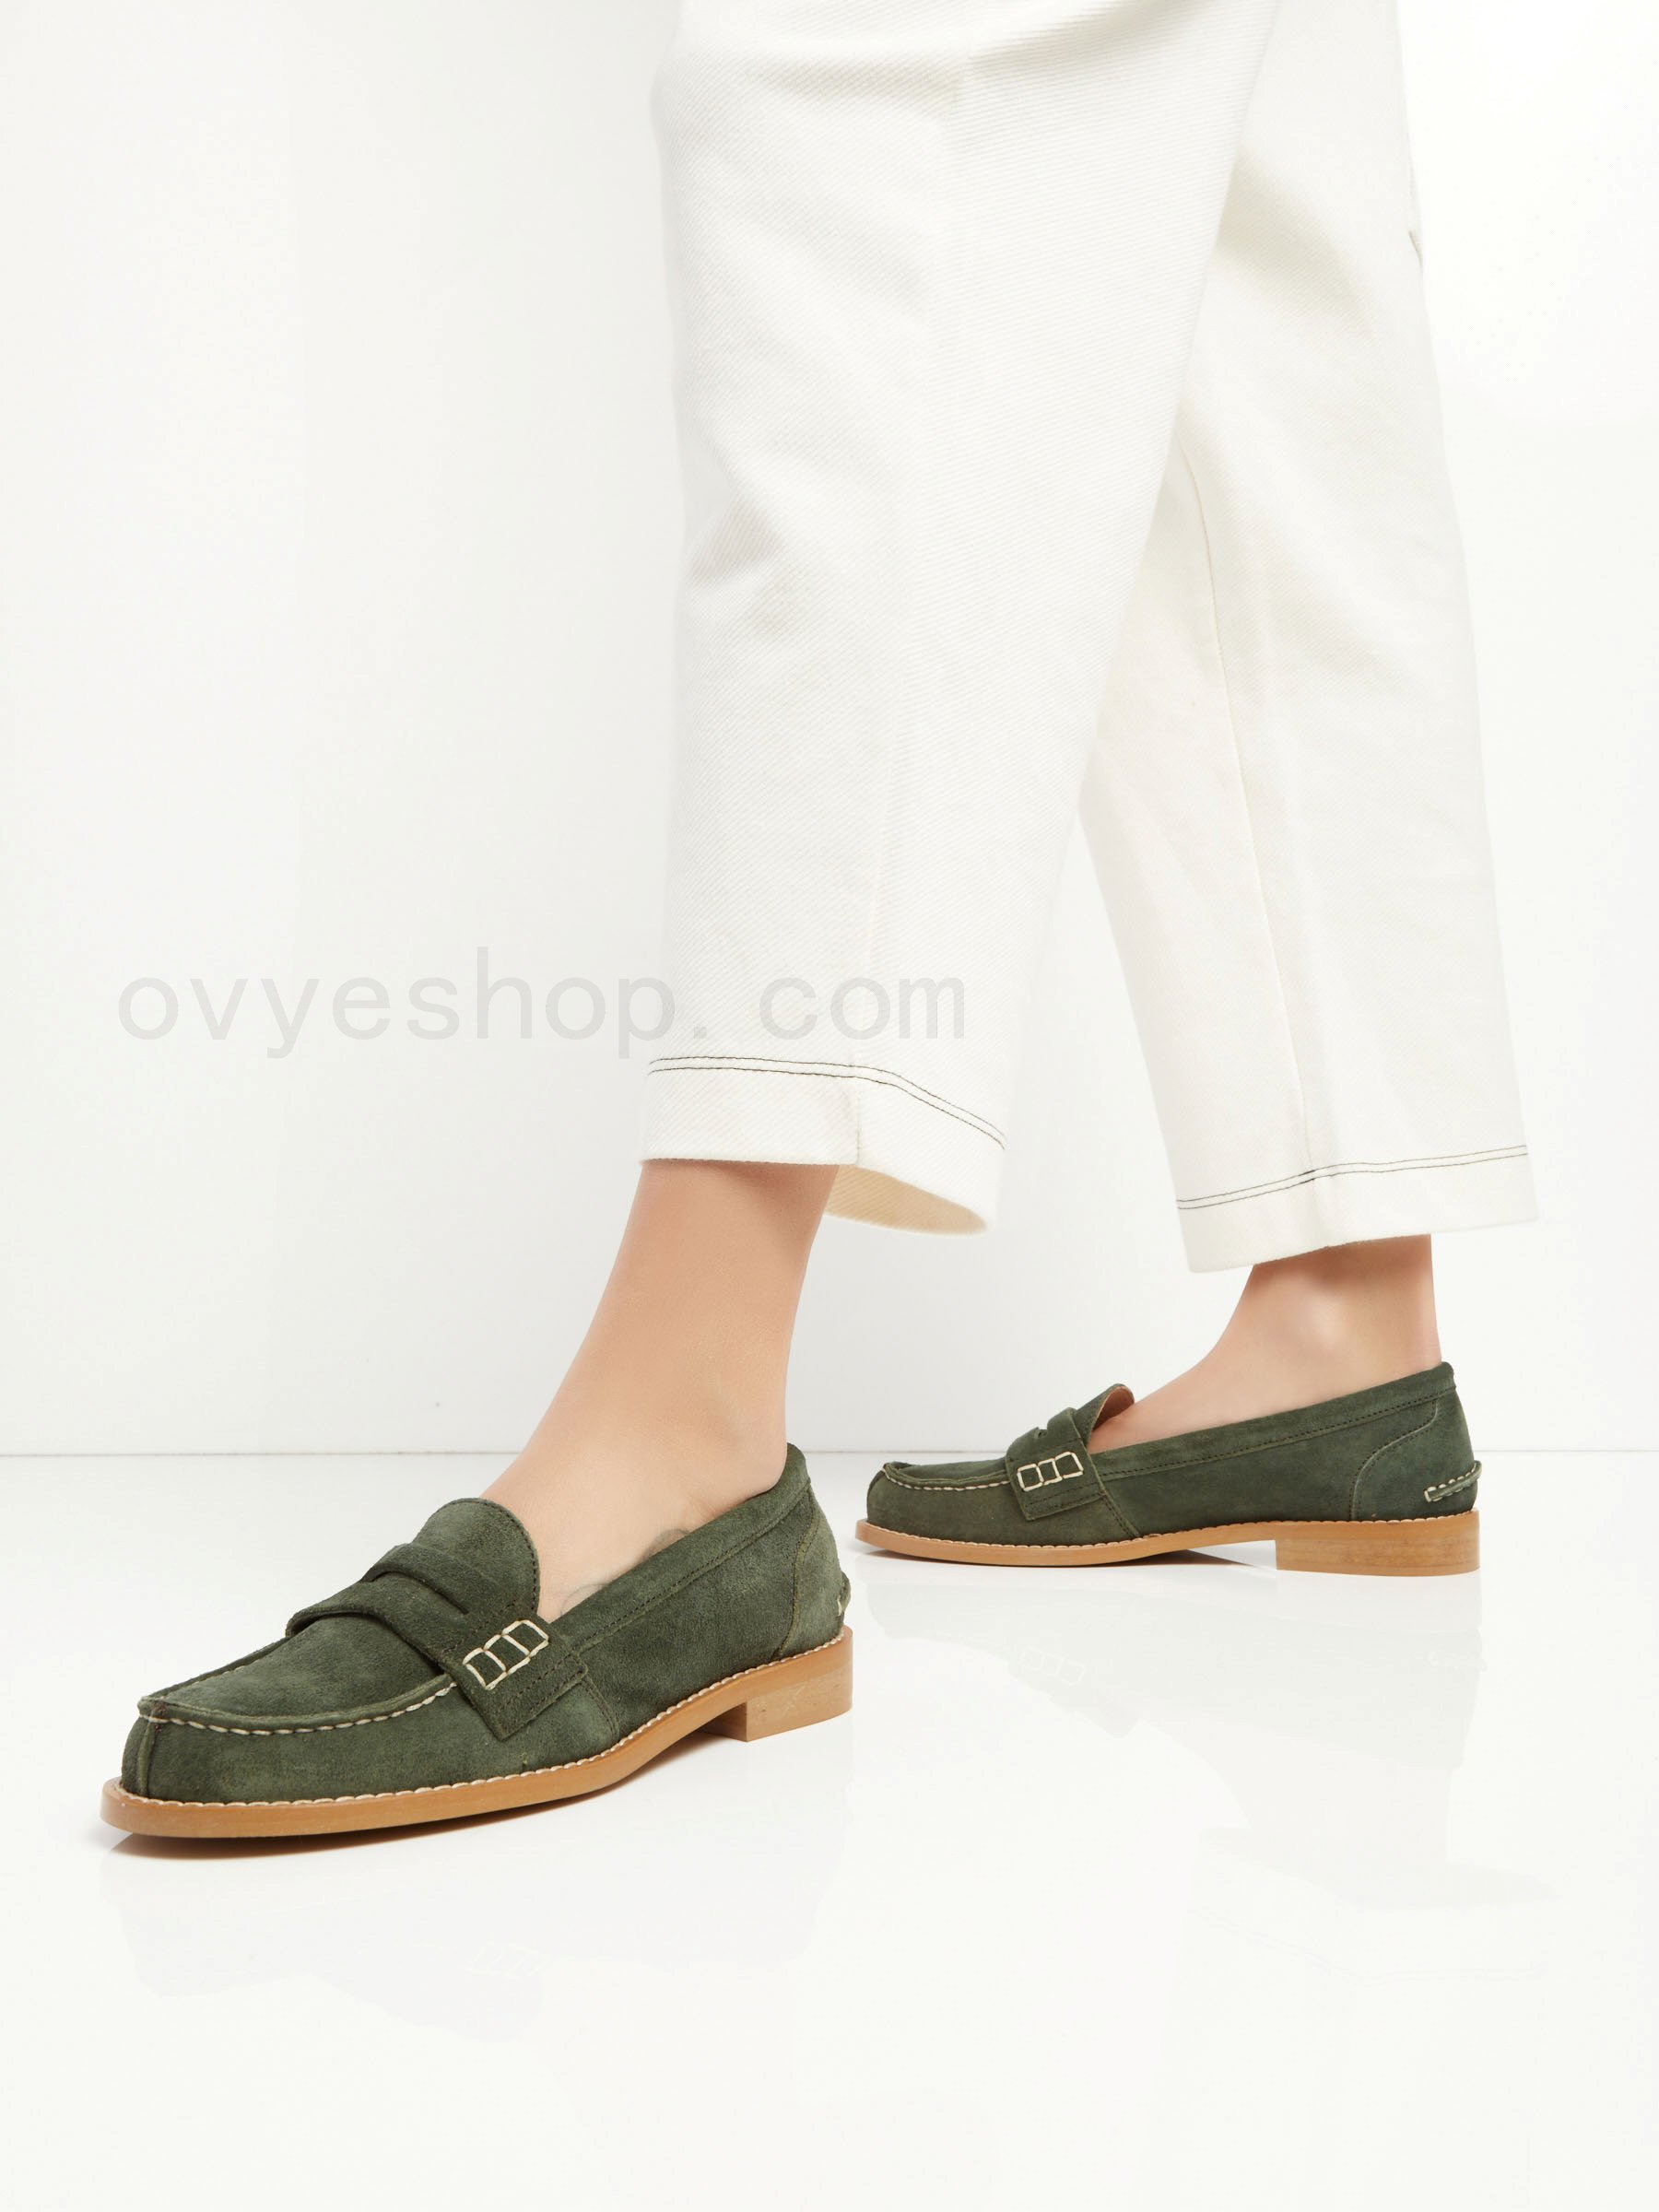 (image for) ovyè shop Suede Loafer F0817885-0430